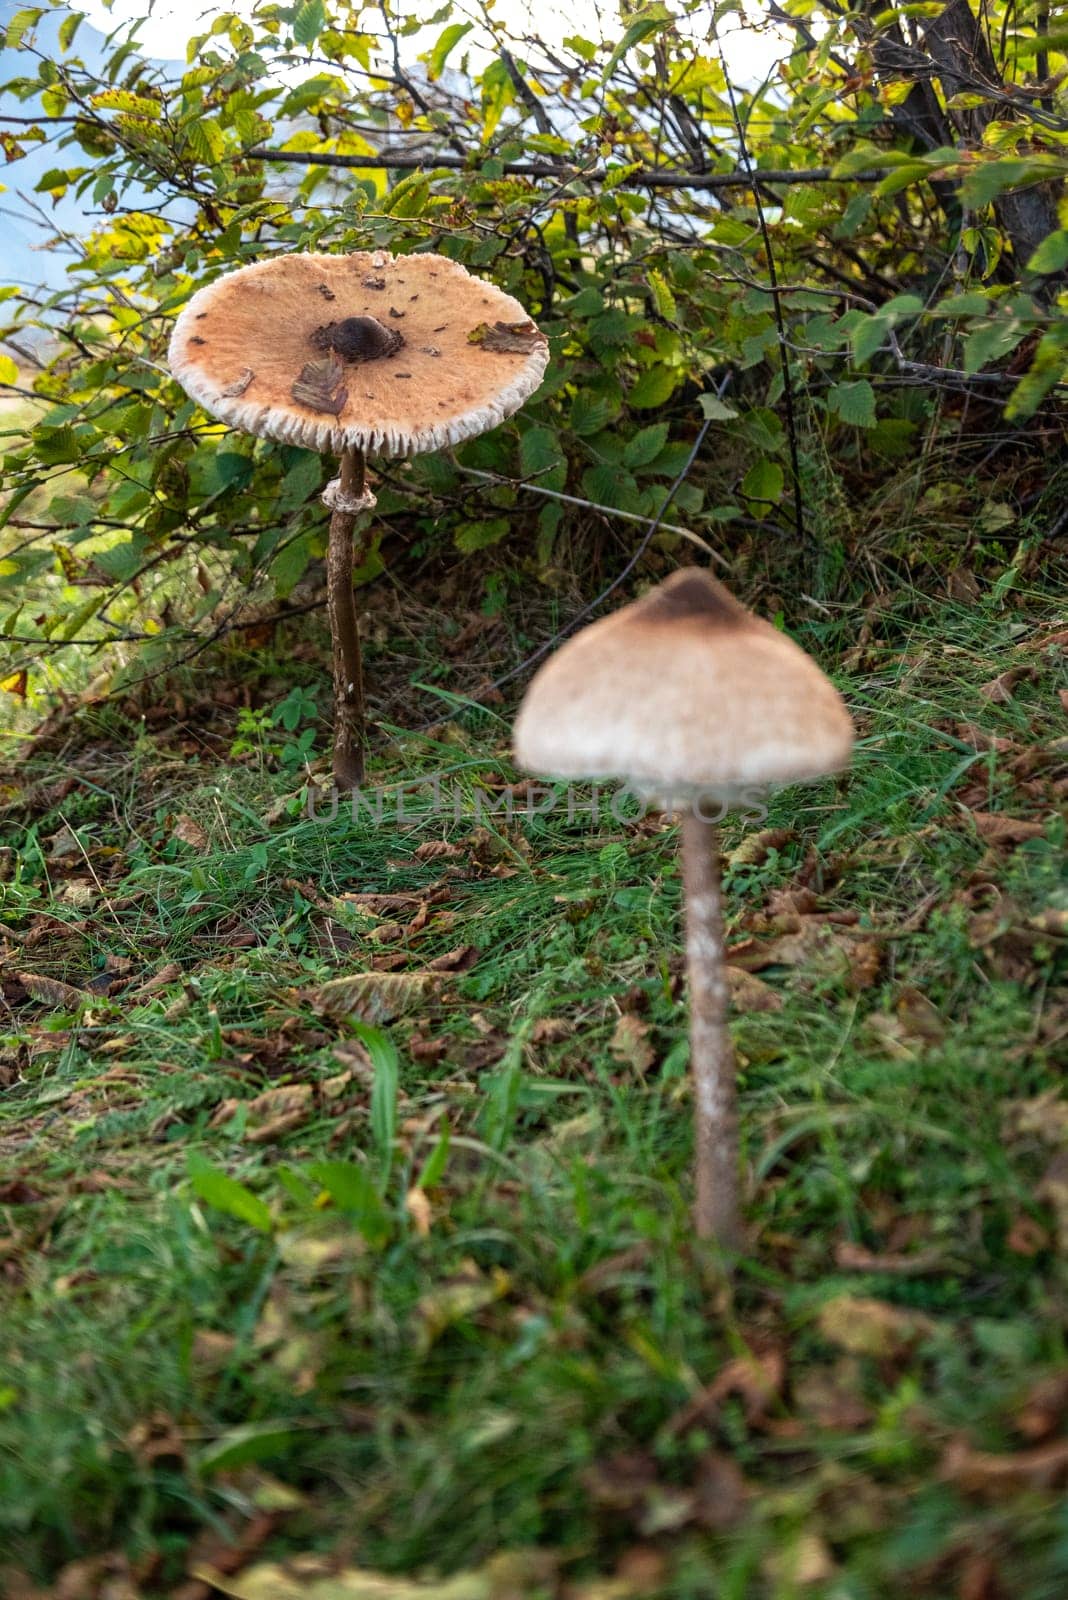 Giant mushrooms in the mountains at lake Como by imagoDens